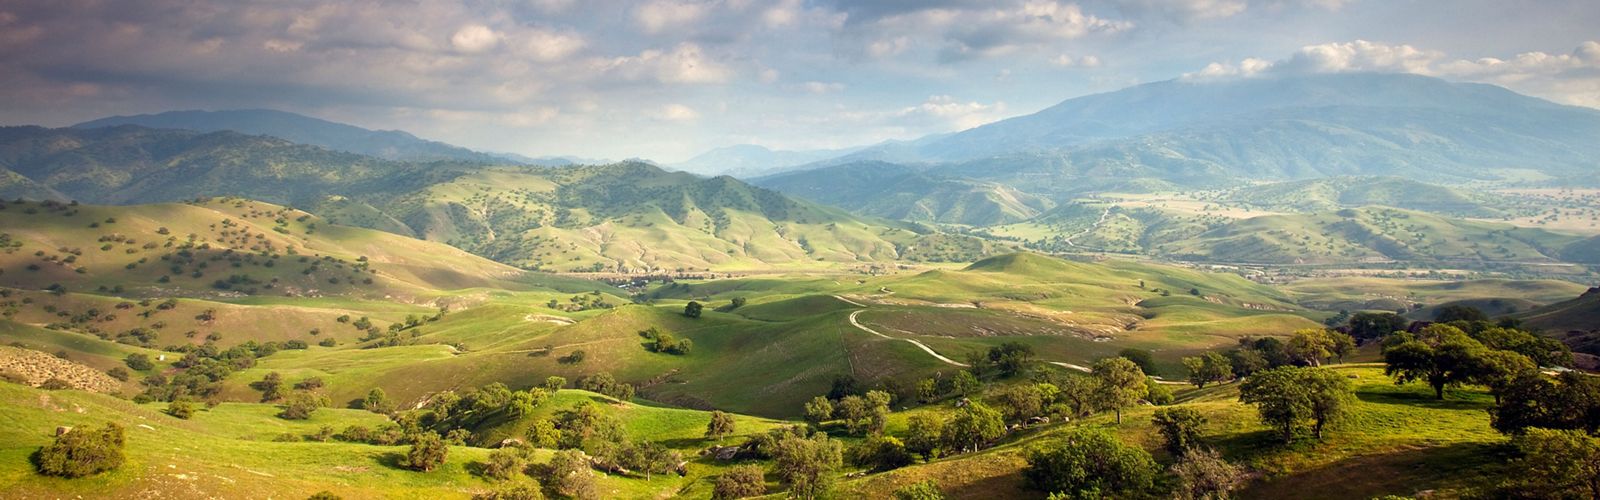 Scenic views of the rolling green hills and oak trees of the Tollhouse Ranch located in the heart of the Tehachapi corridor, California.